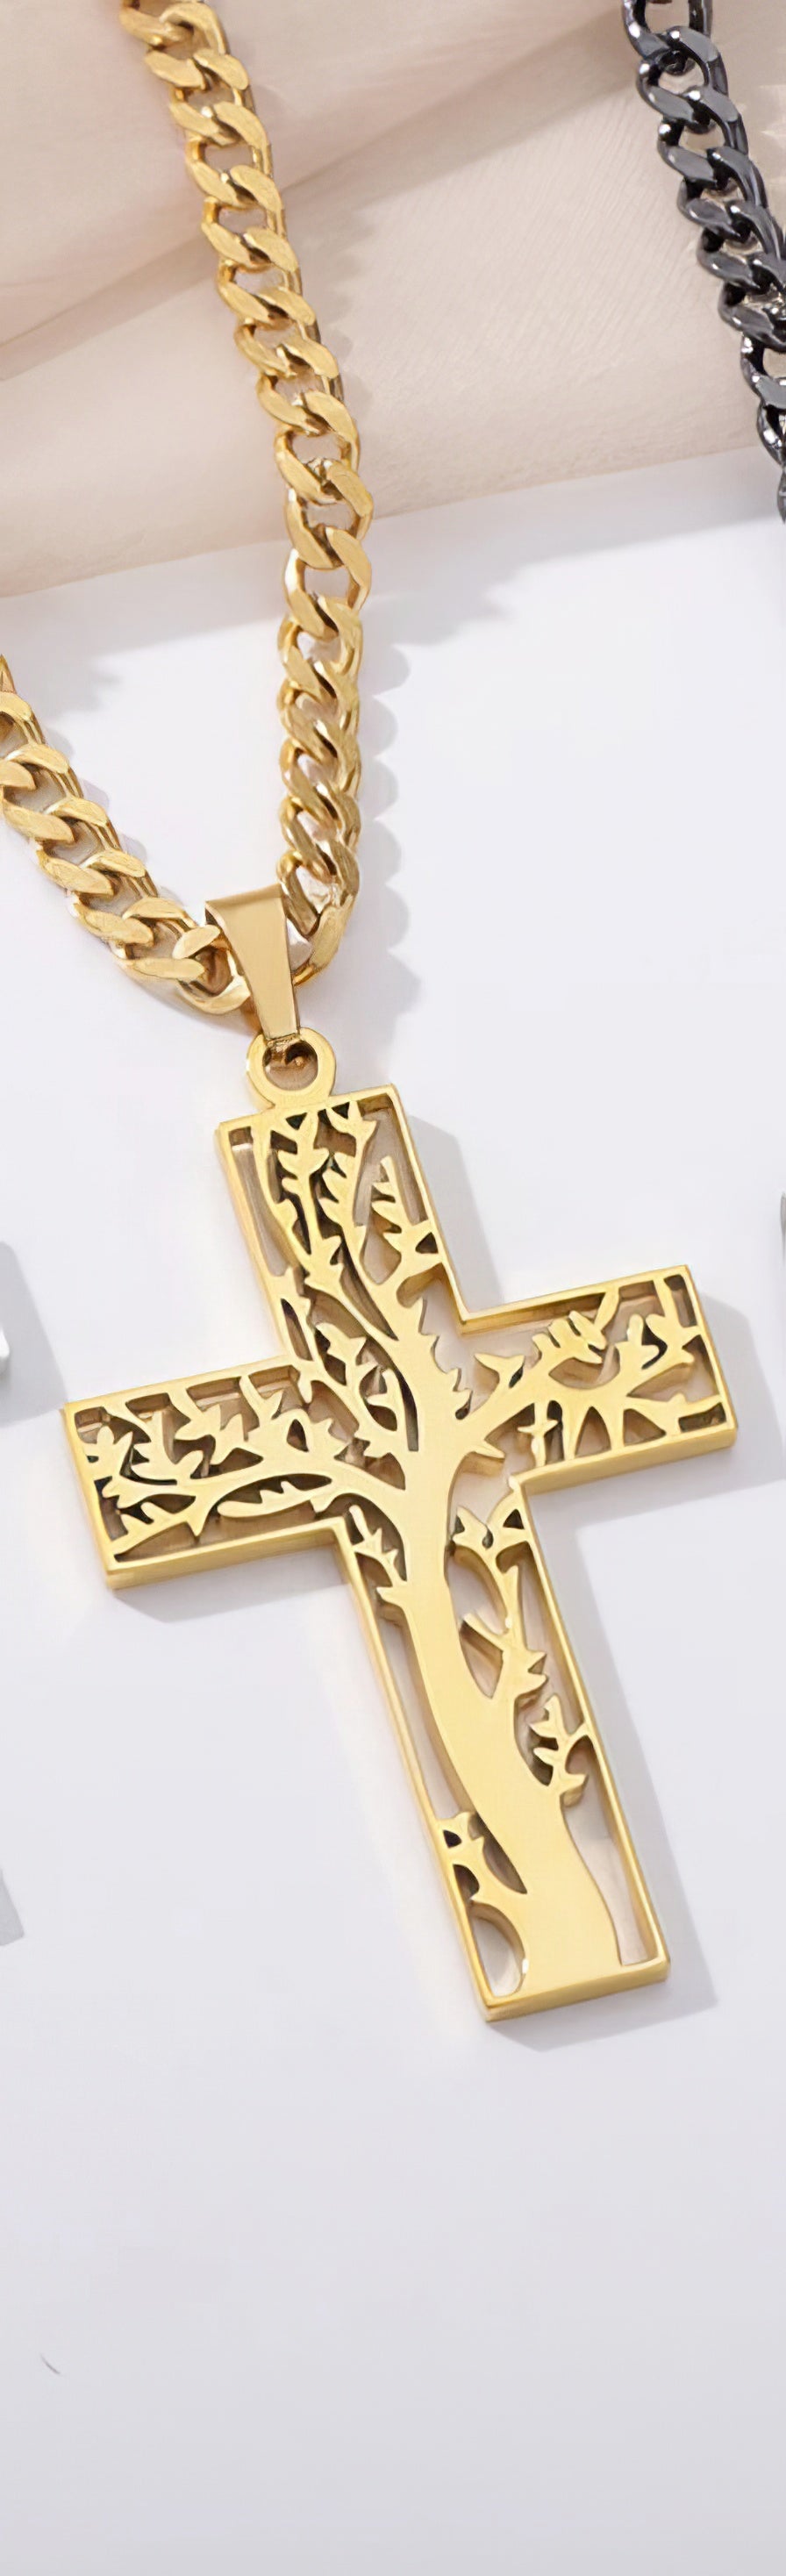 Tree of Life Design Cross Pendant Necklace in Gold